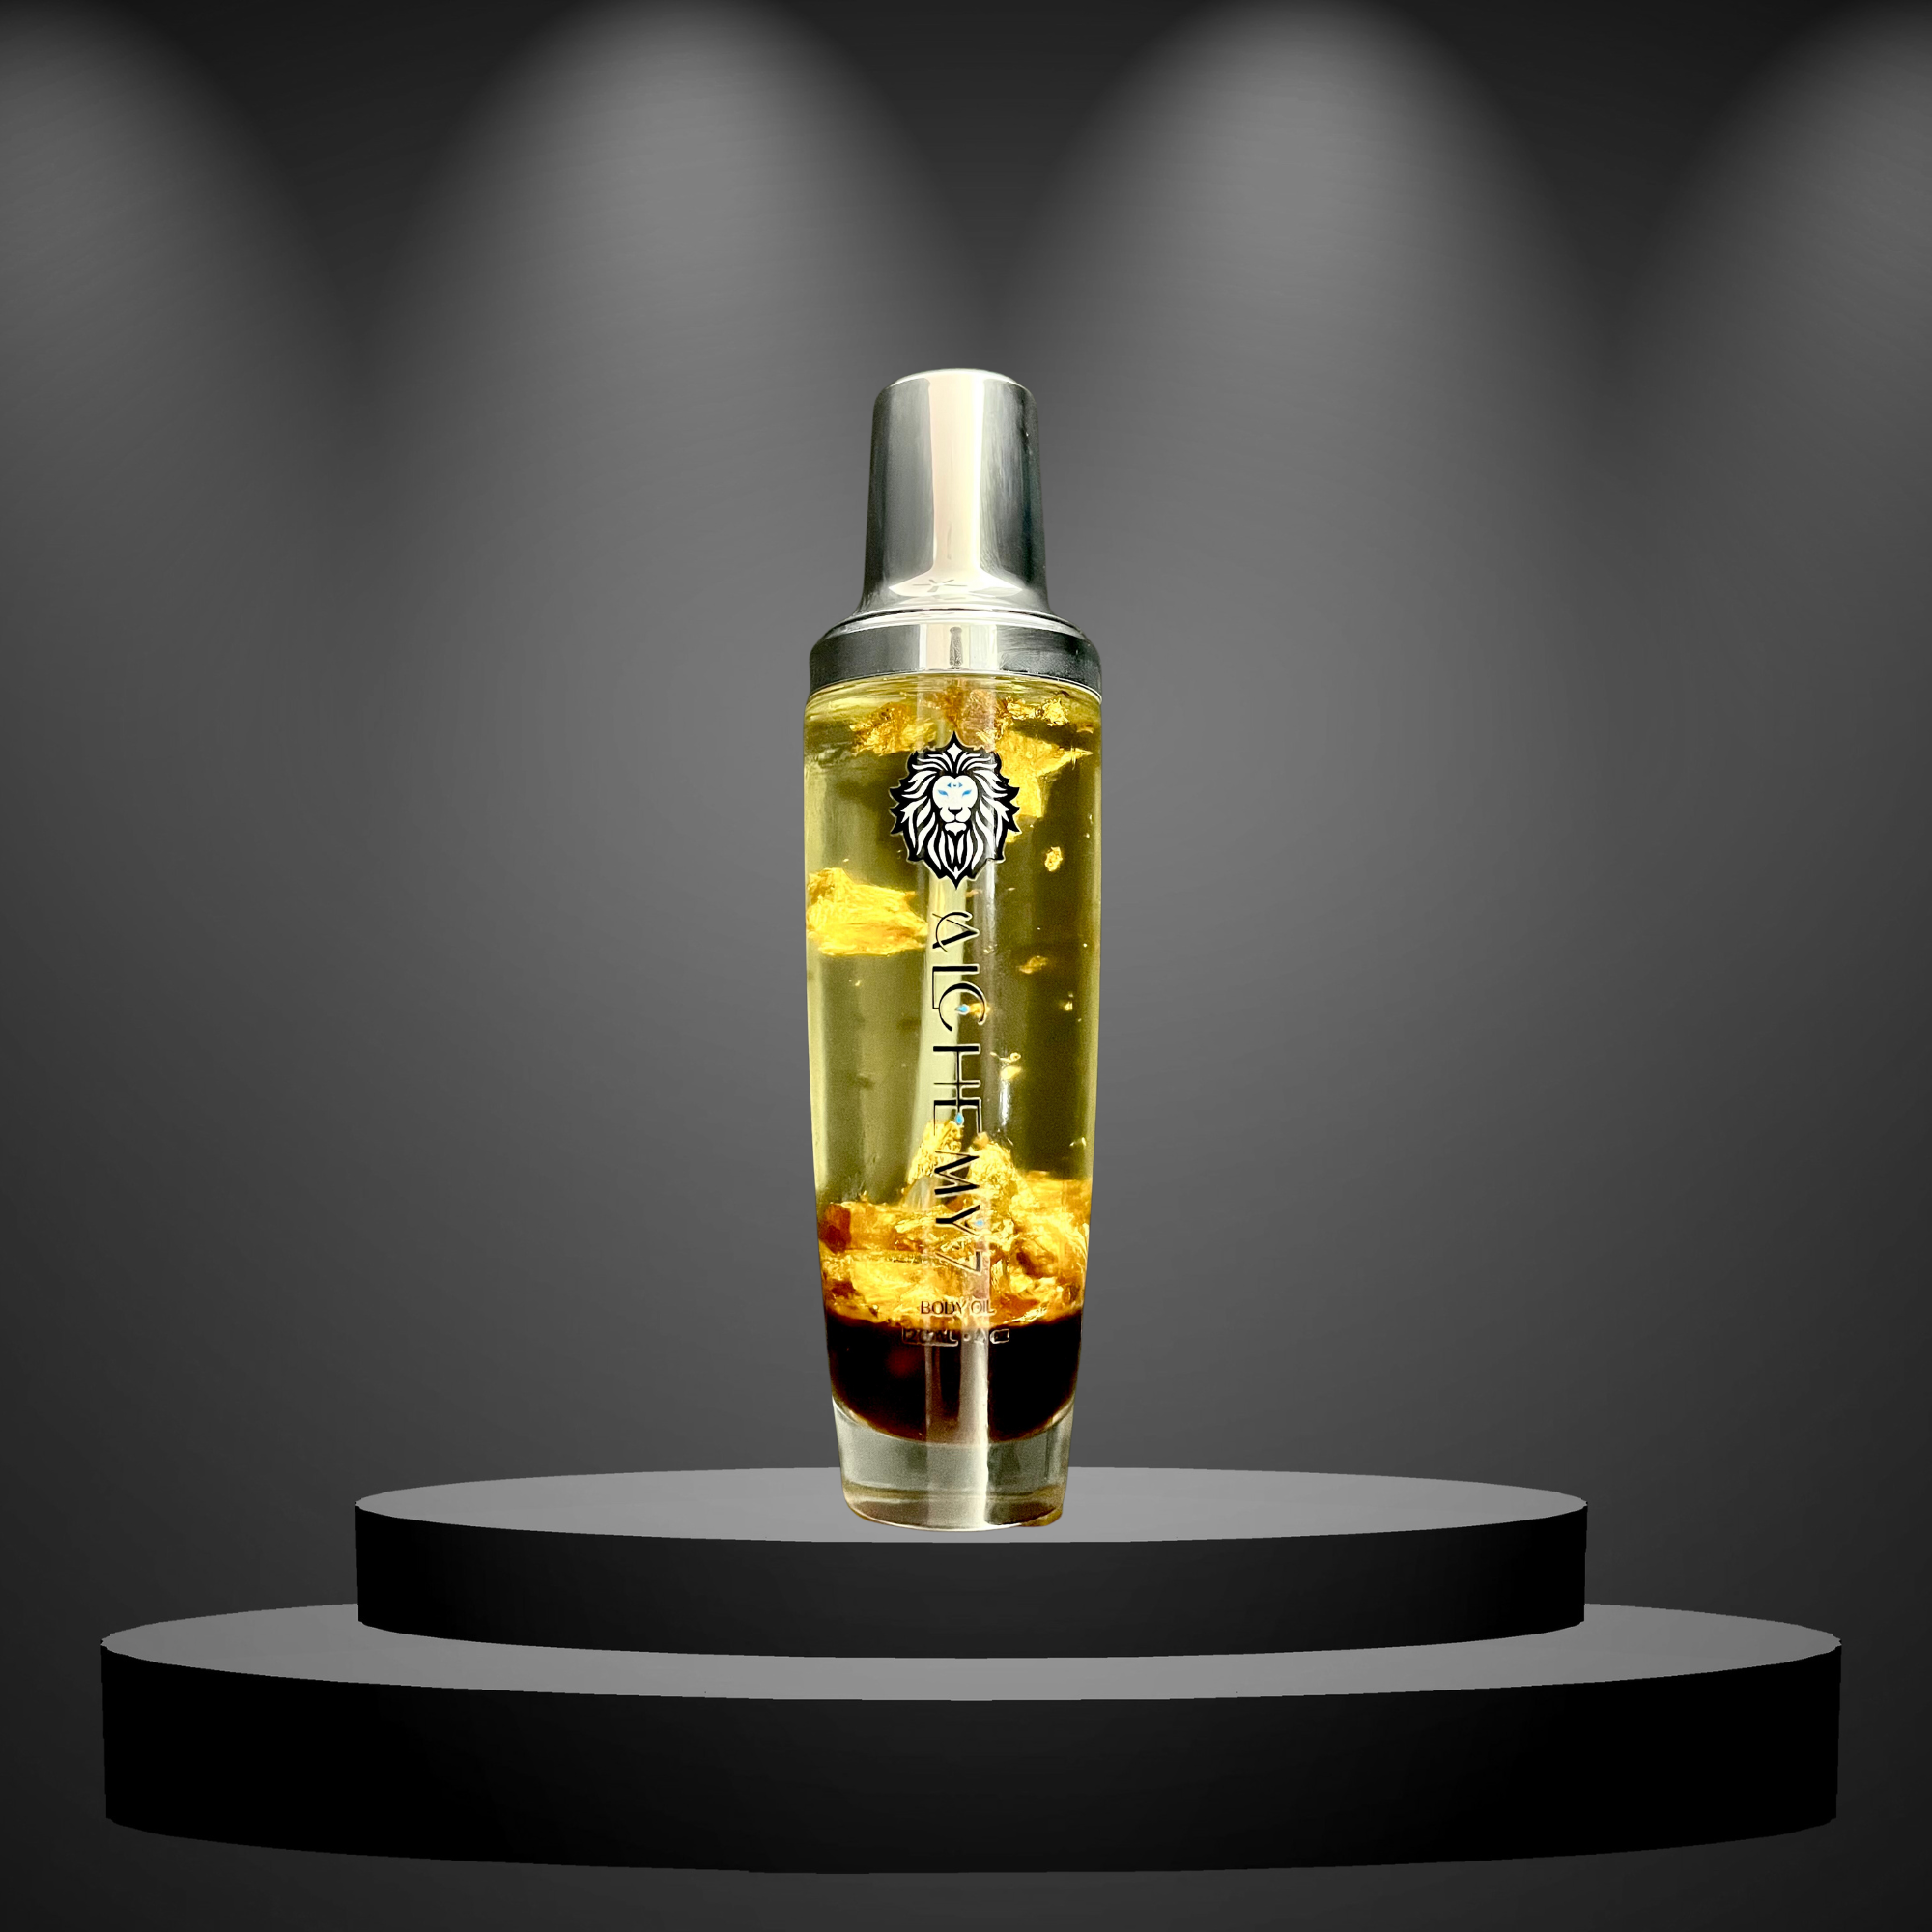 Alchemy7 | Body Oil Serum with Anti-Aging Effects